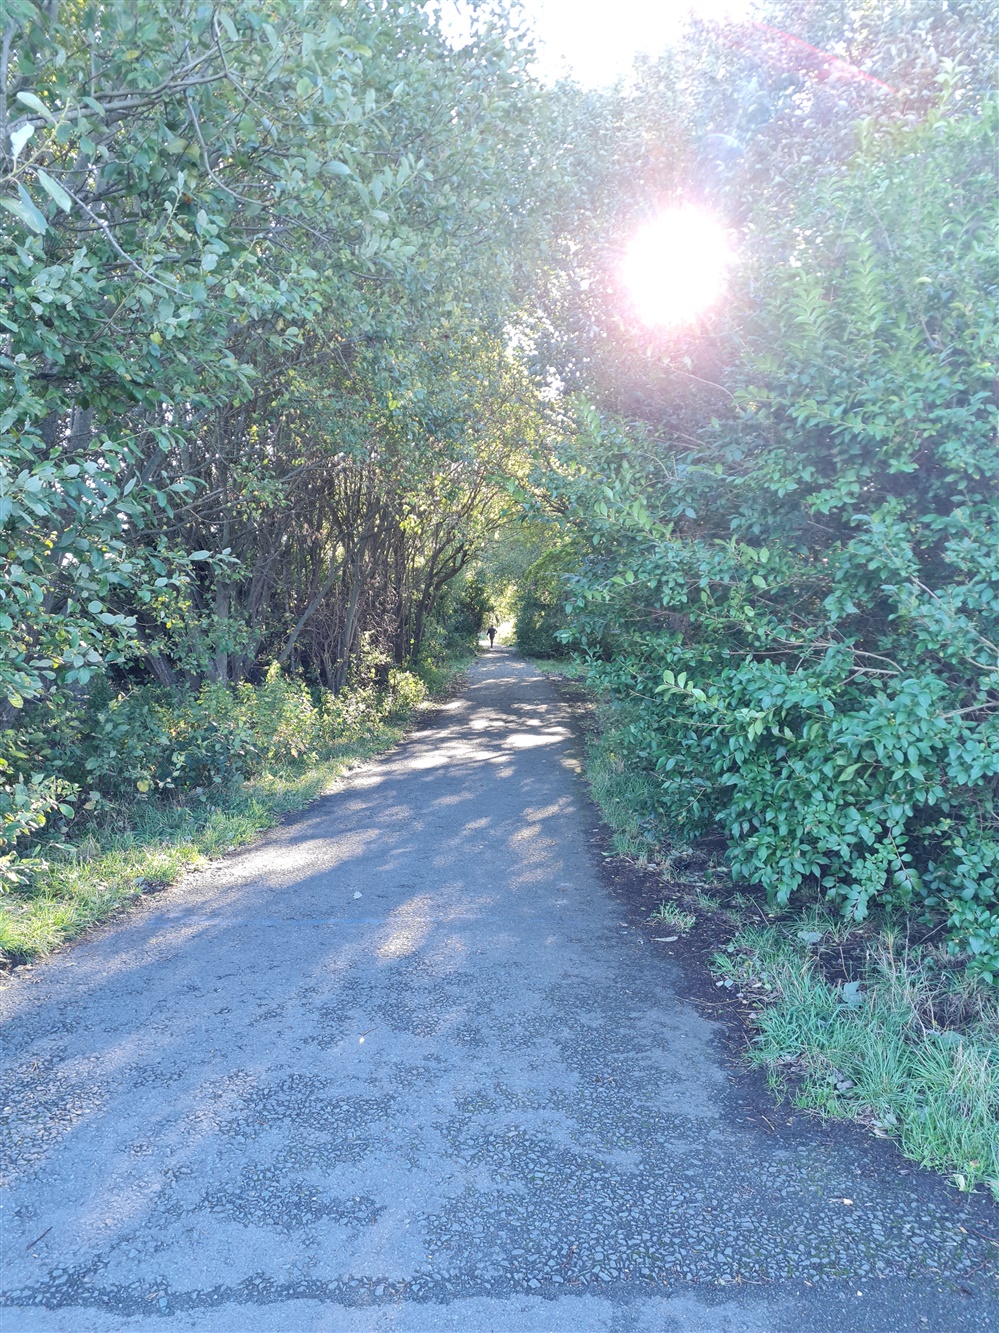 A photograph of a sunny tree lined footpath with a figure in the distance